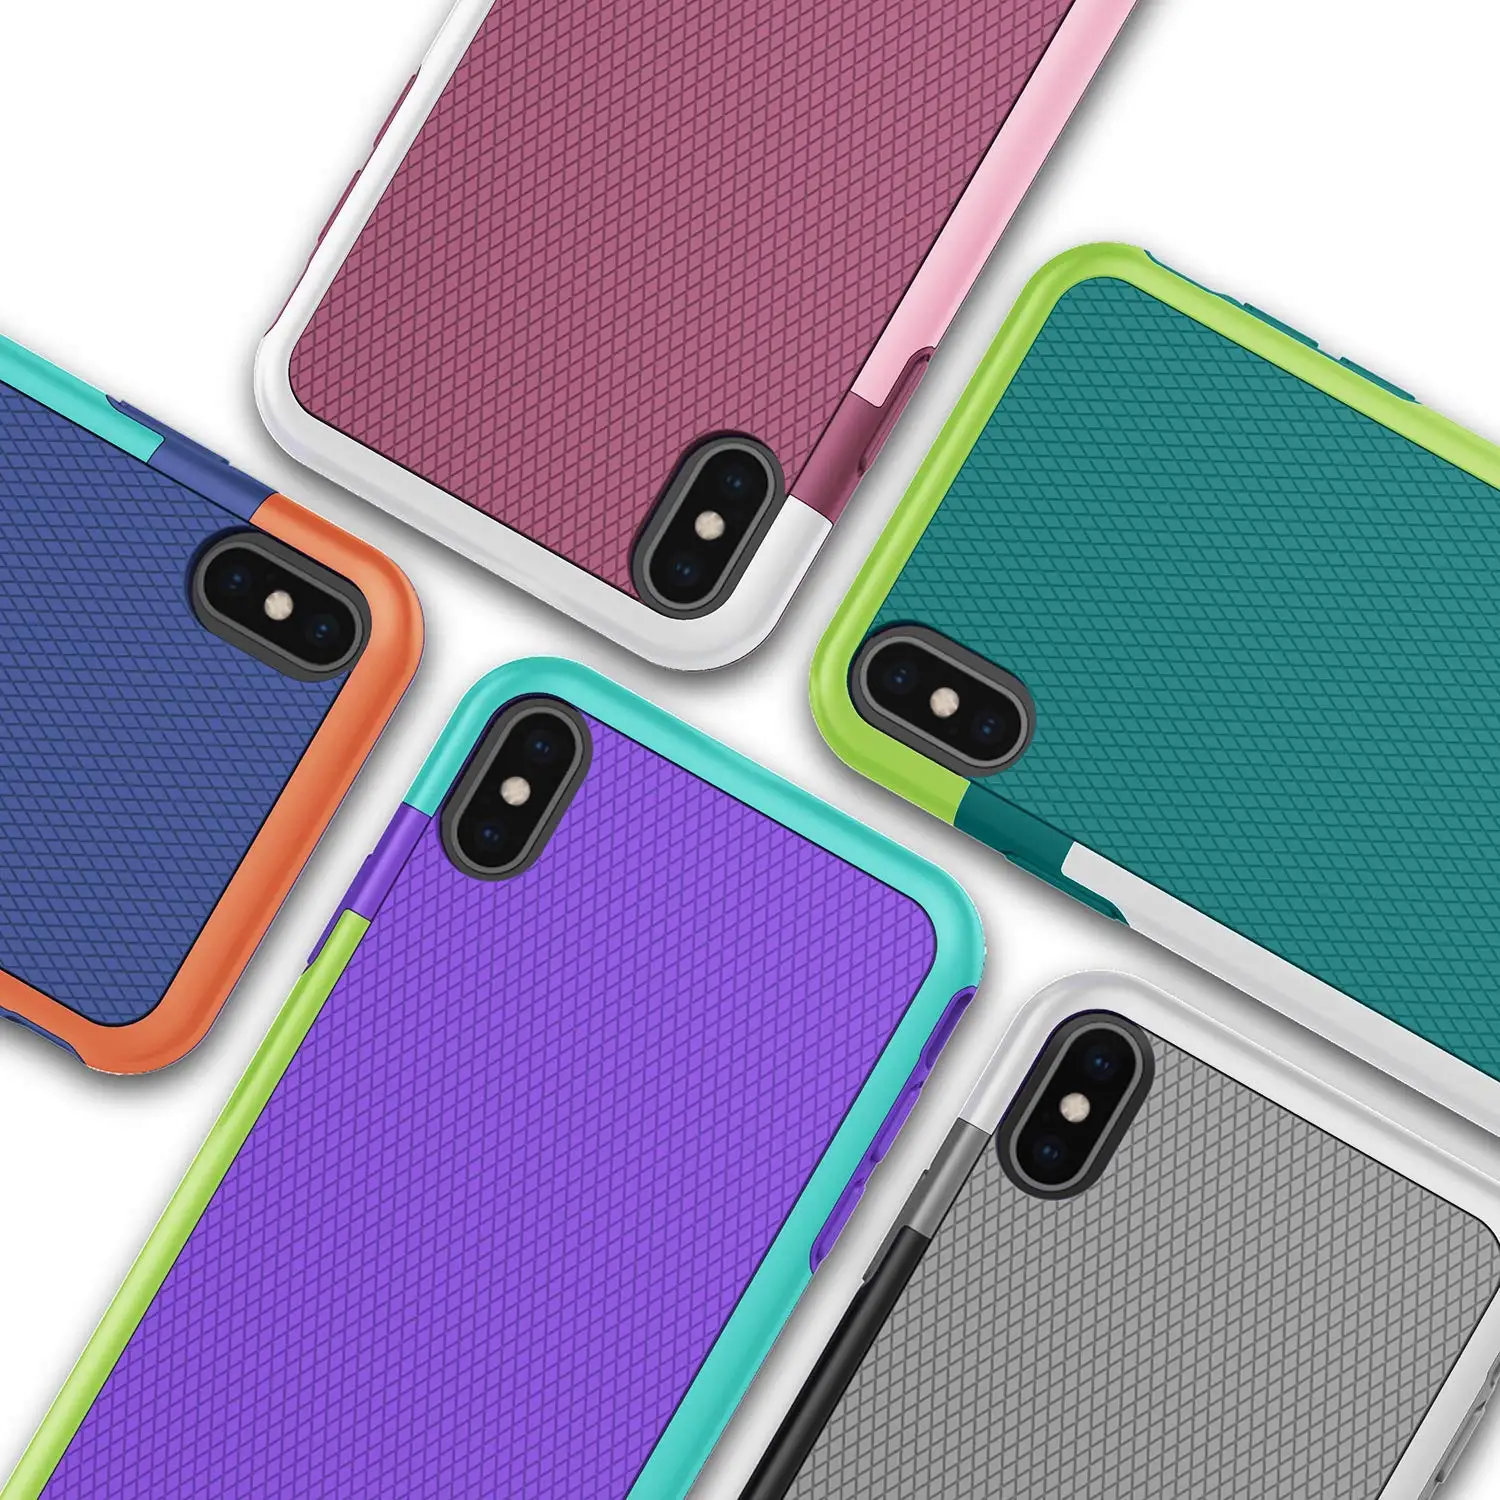 Hybrid Gel Rubber Anti-Slip Protective Case for iPhone 11 12 Pro XS Max Mini X XR 7 8 6 6S Plus SE 2020 Silicon ShockProof Cover iphone 12 pro max leather case